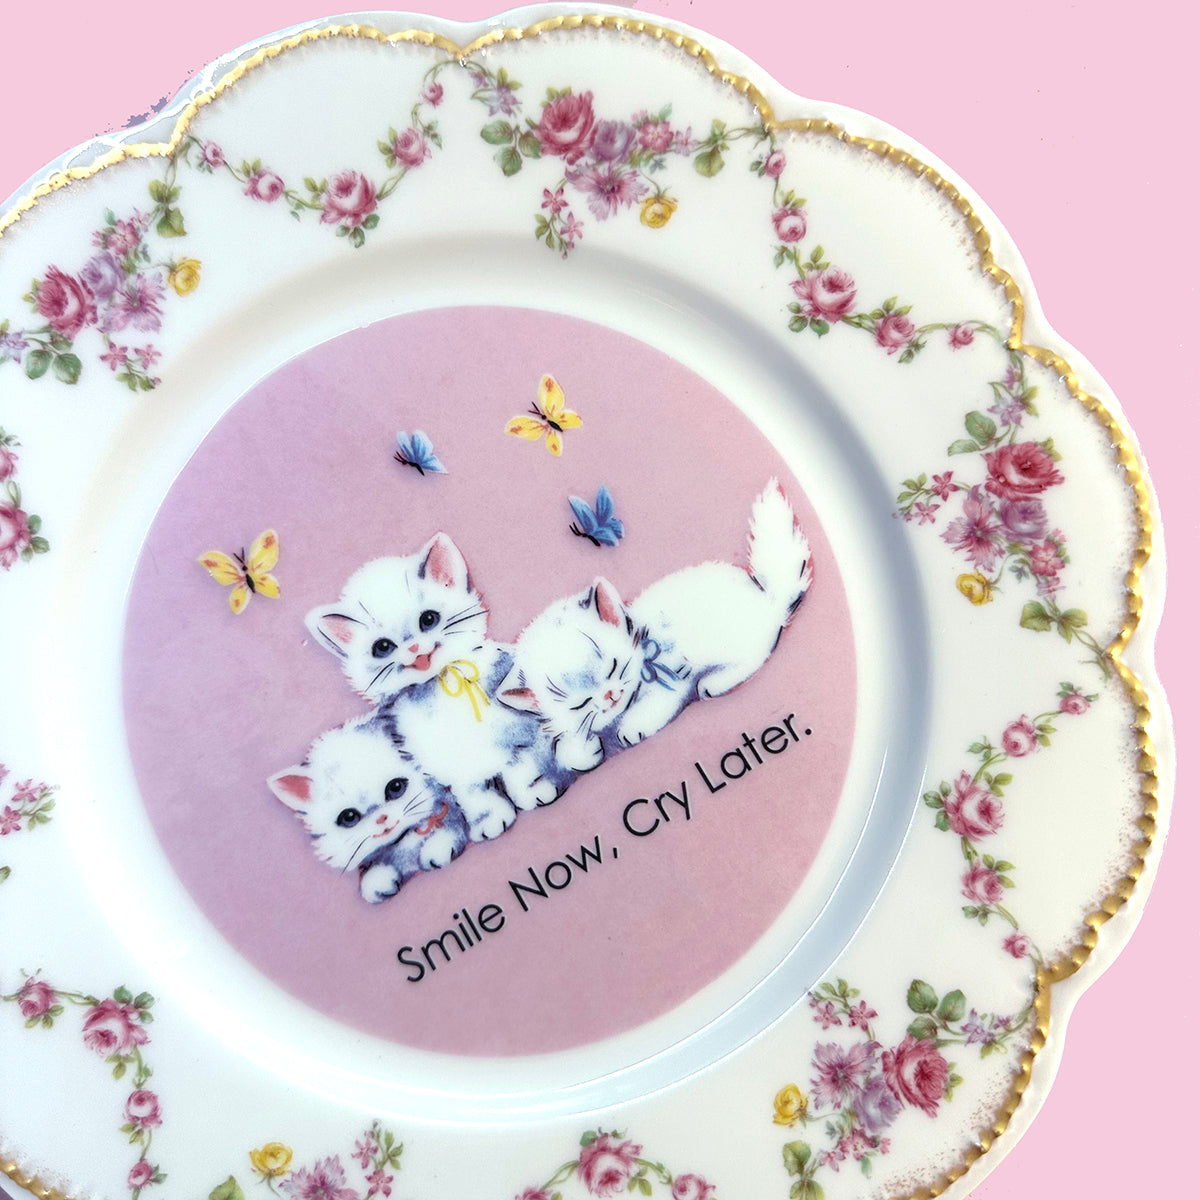 Vintage Art Plate -Art Plate - "Smile Now, Cry Later."